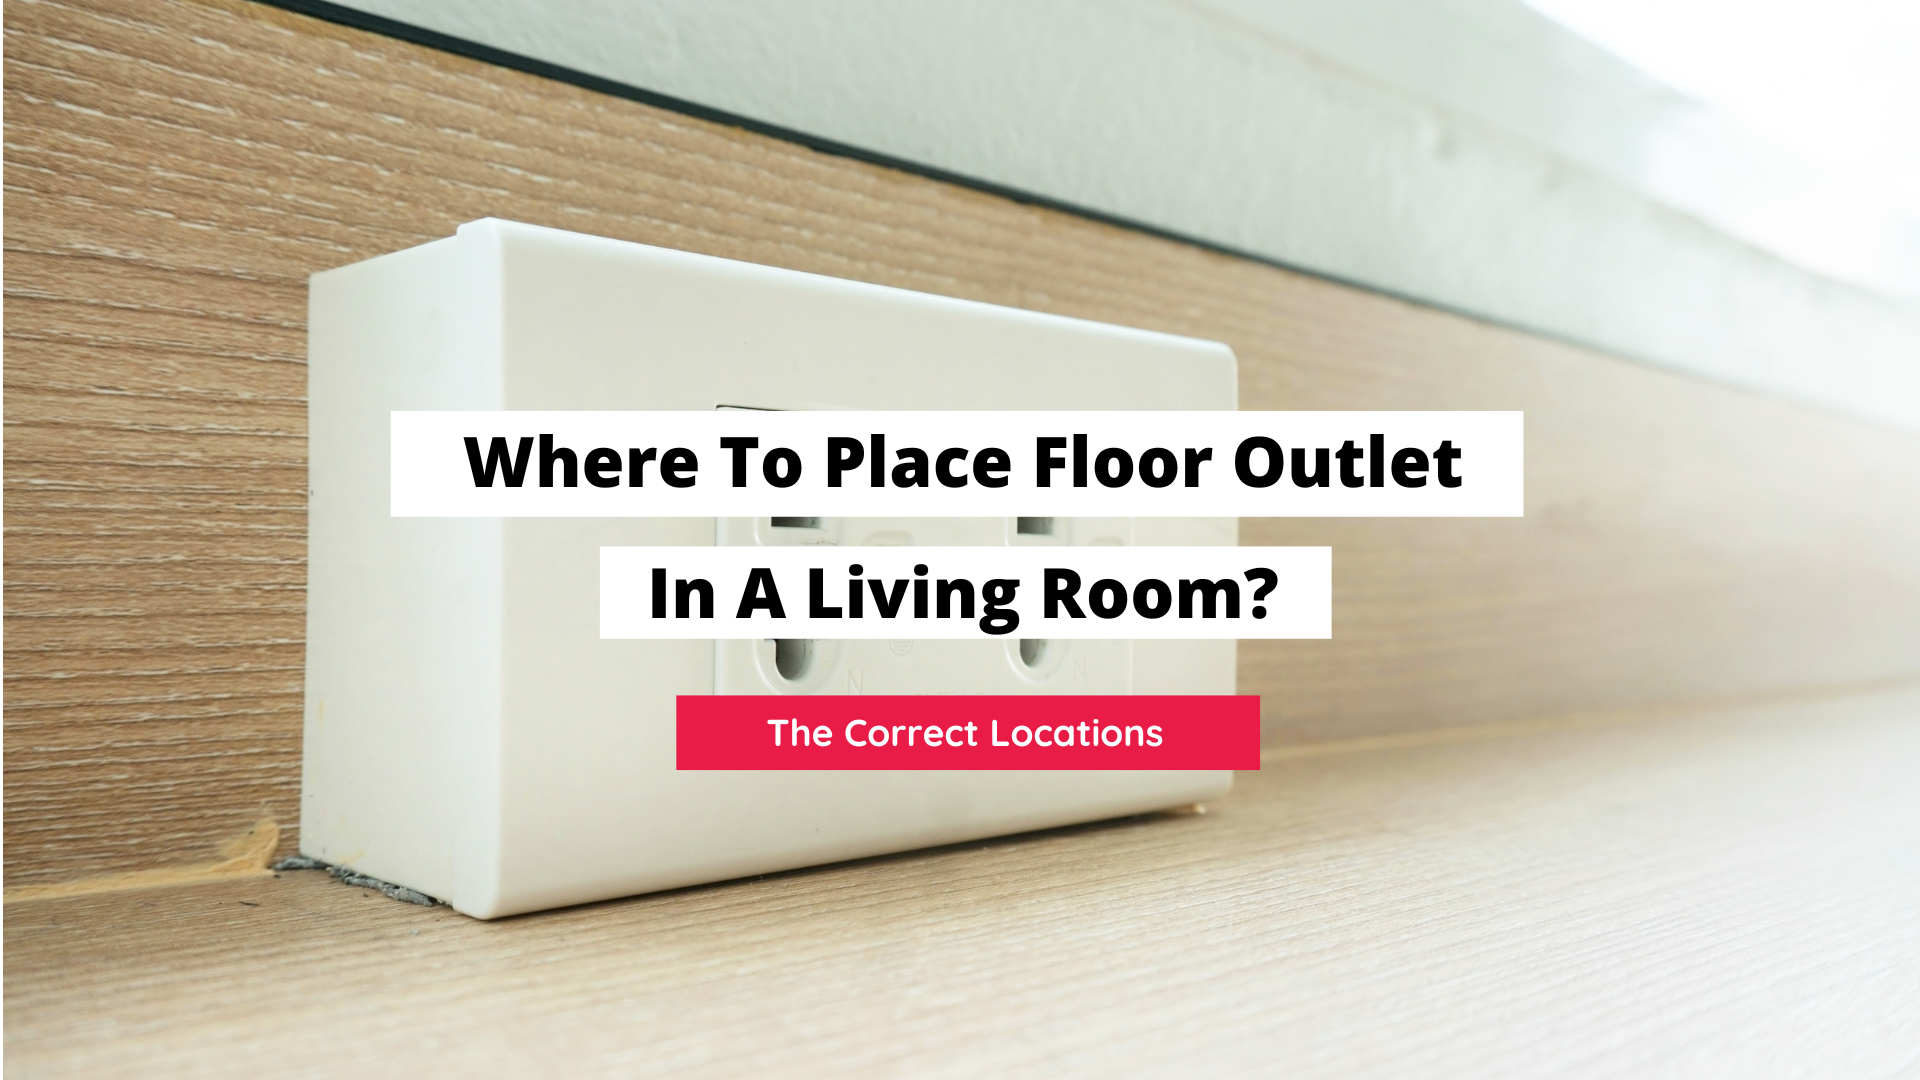 No Floor Outlets In Living Room